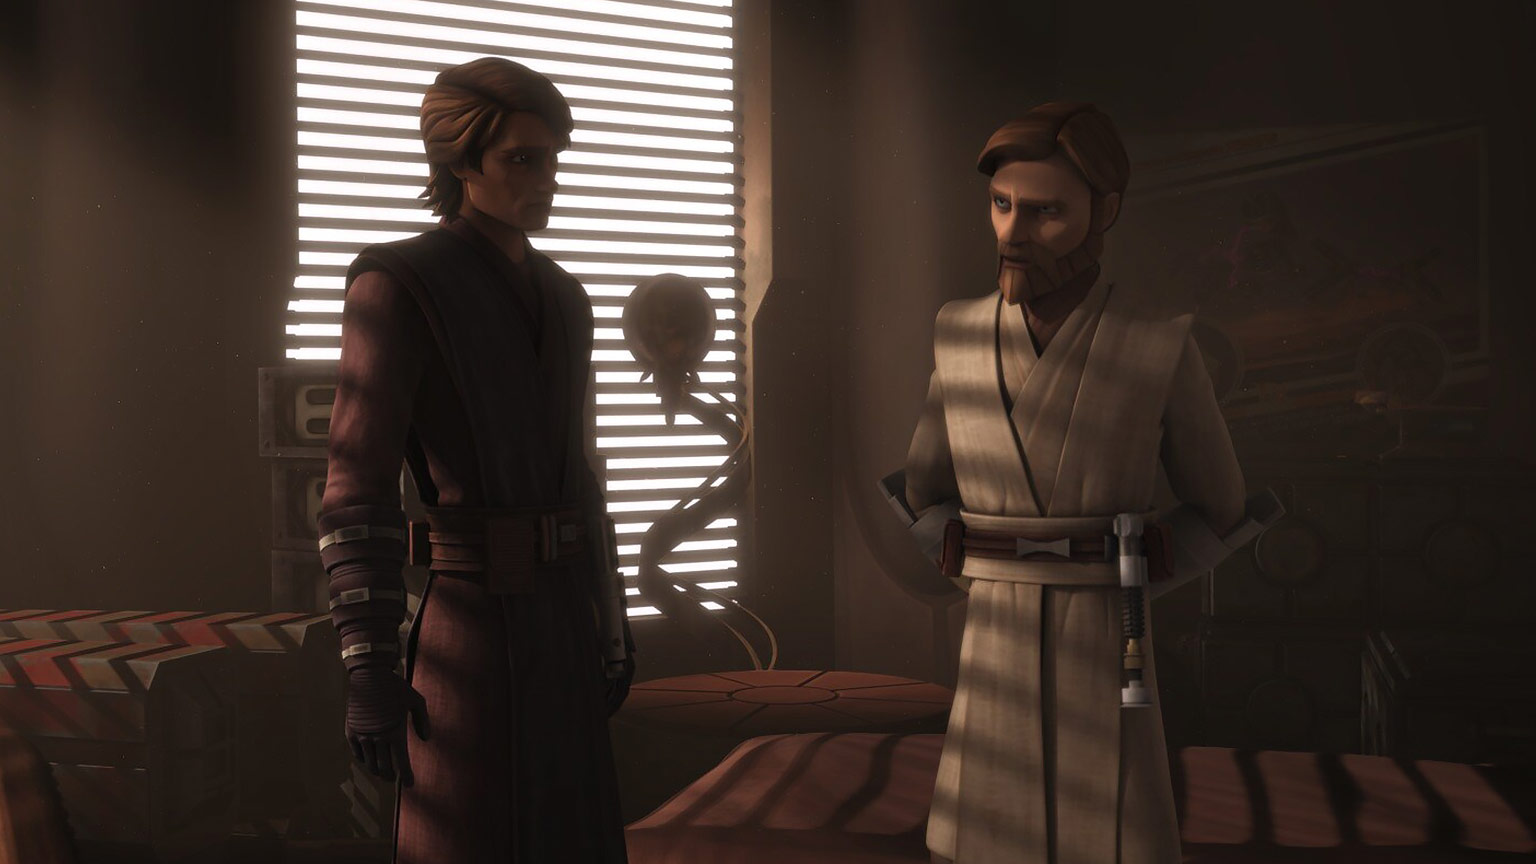 The Clone Wars Rewatch: Anakin’s Rage and “The Rise of Clovis”